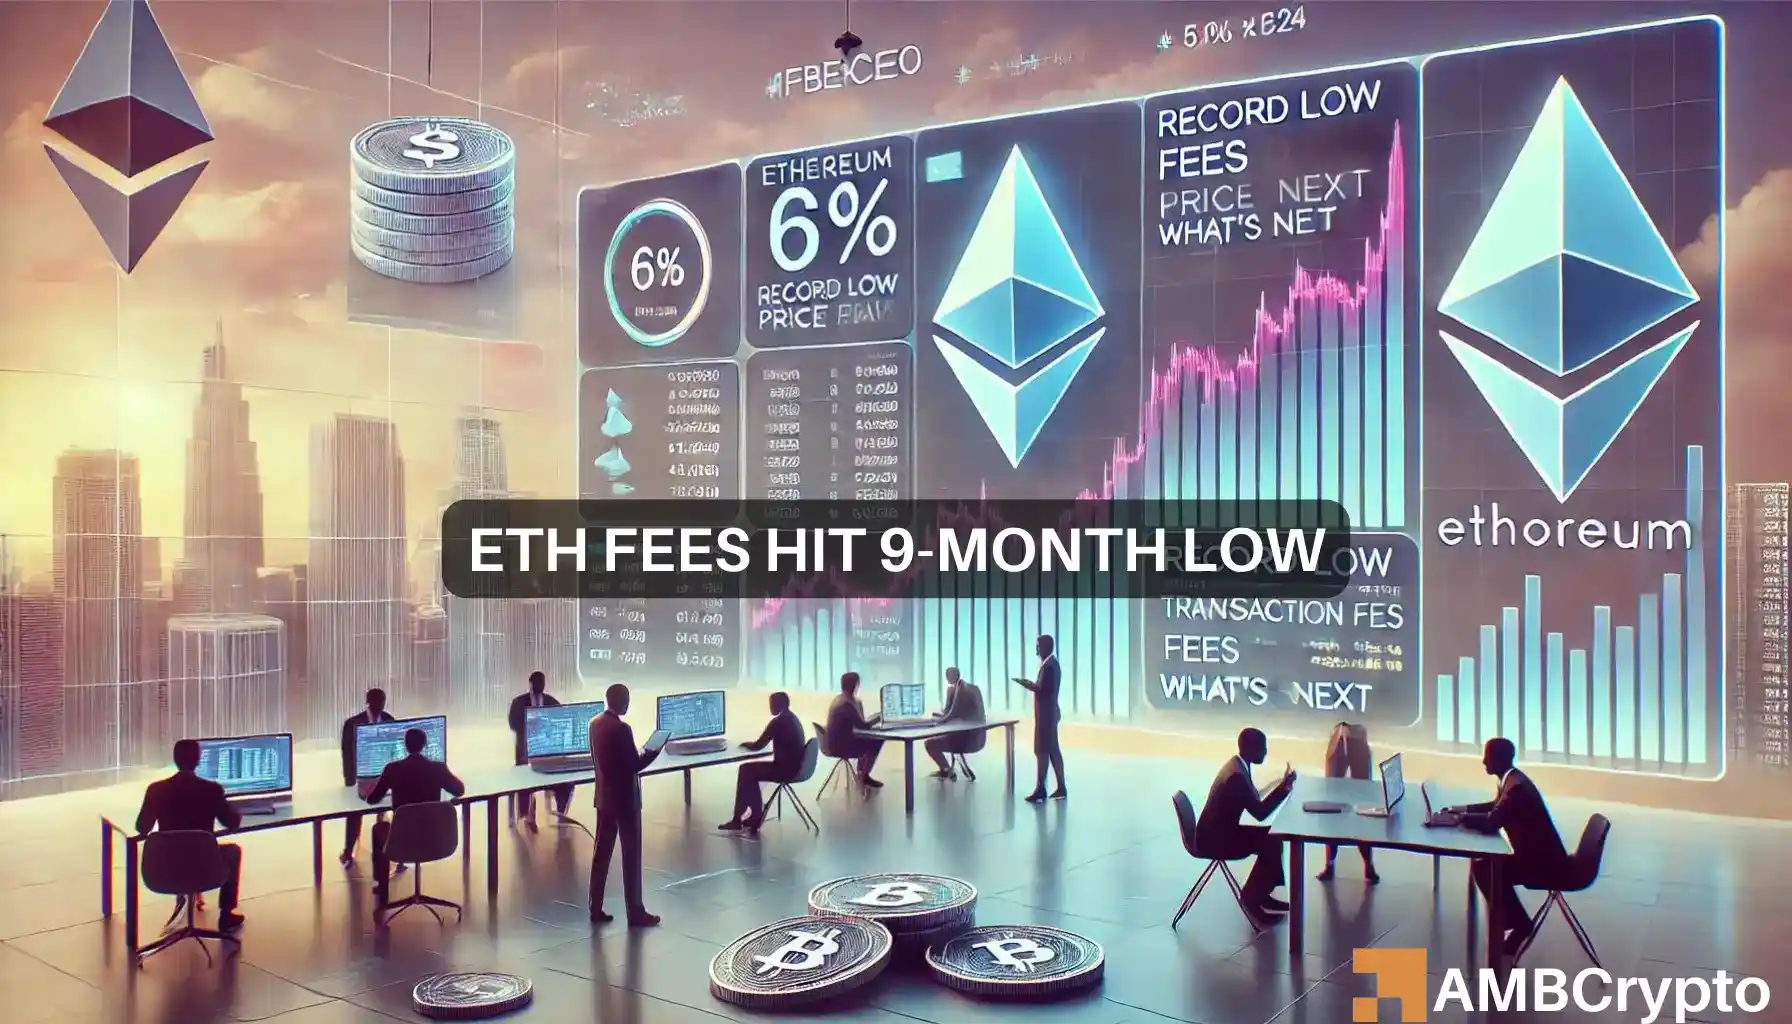 Ethereum’s challenge – Record low fees and a 6% price decline mean…